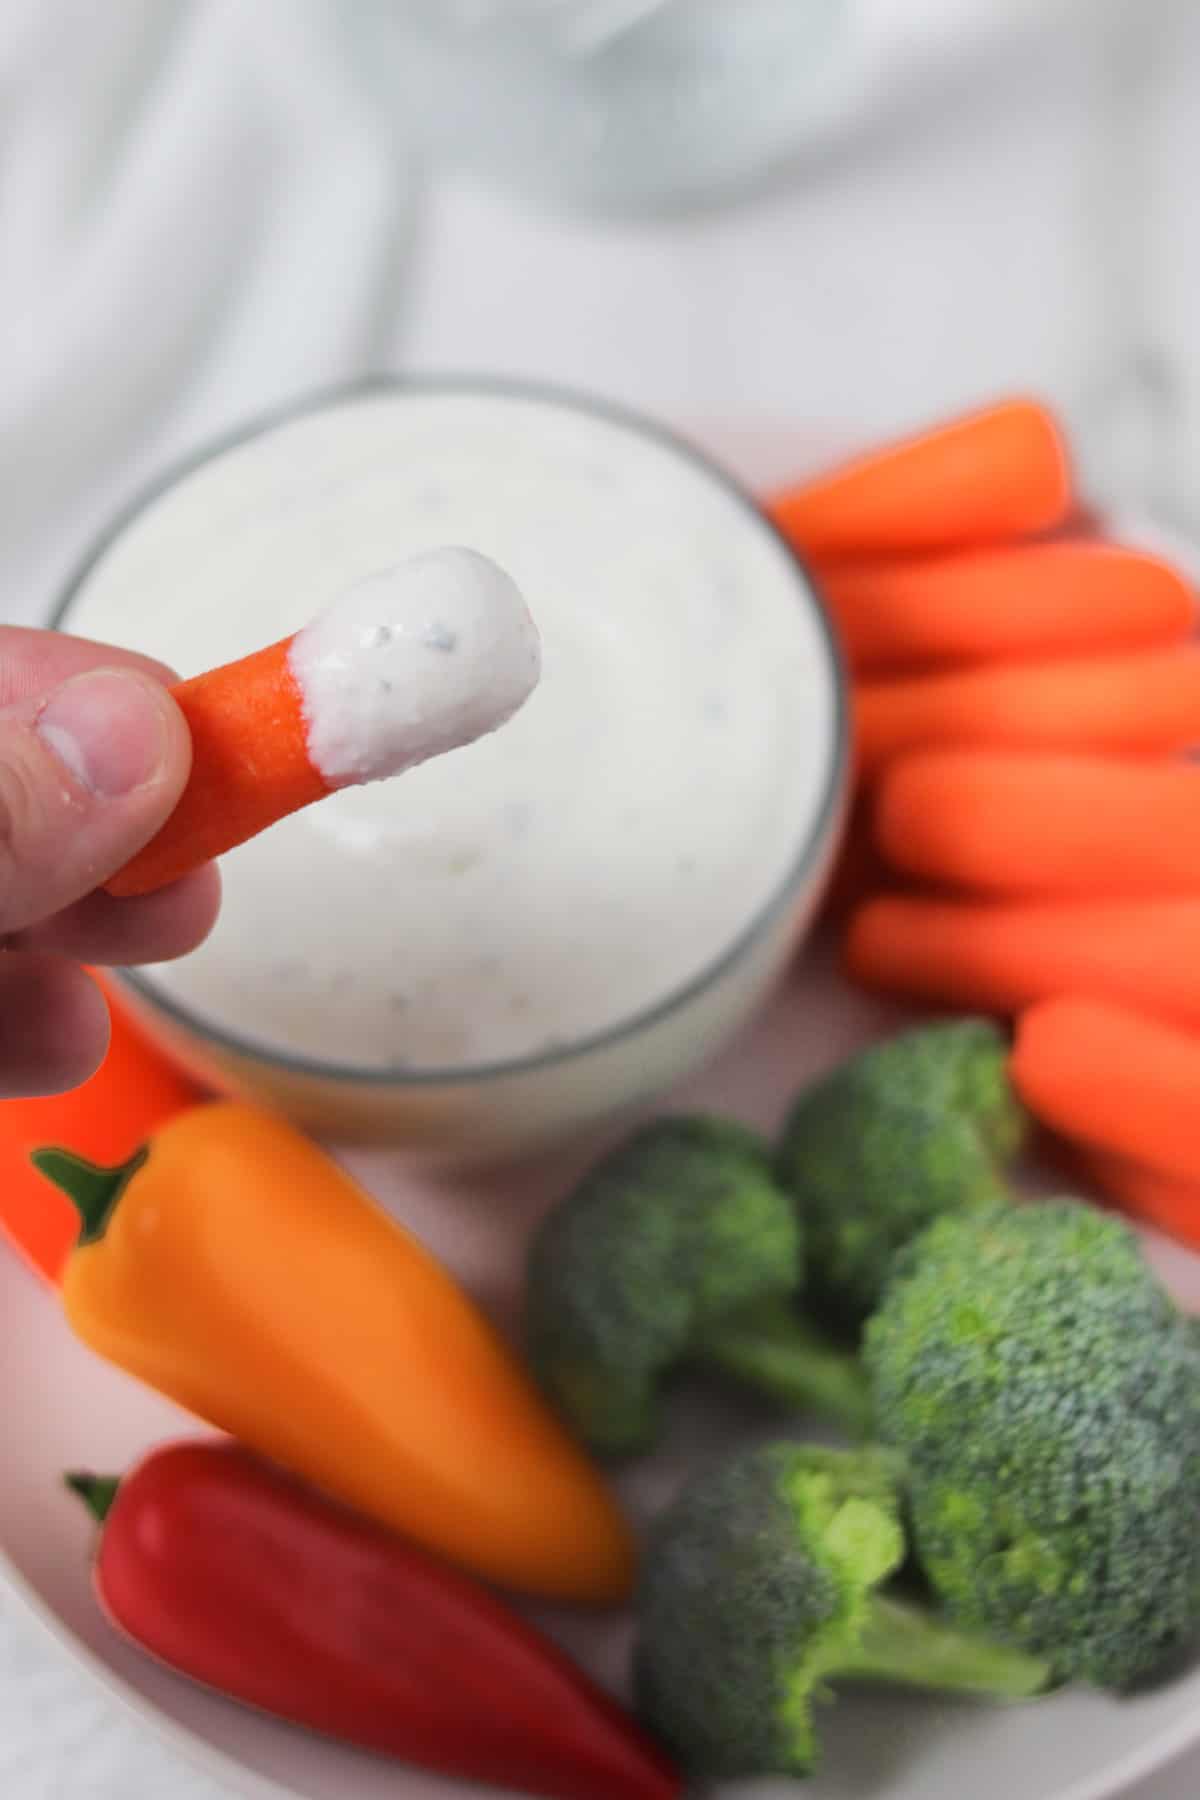 dipping a carrot in ranch dip